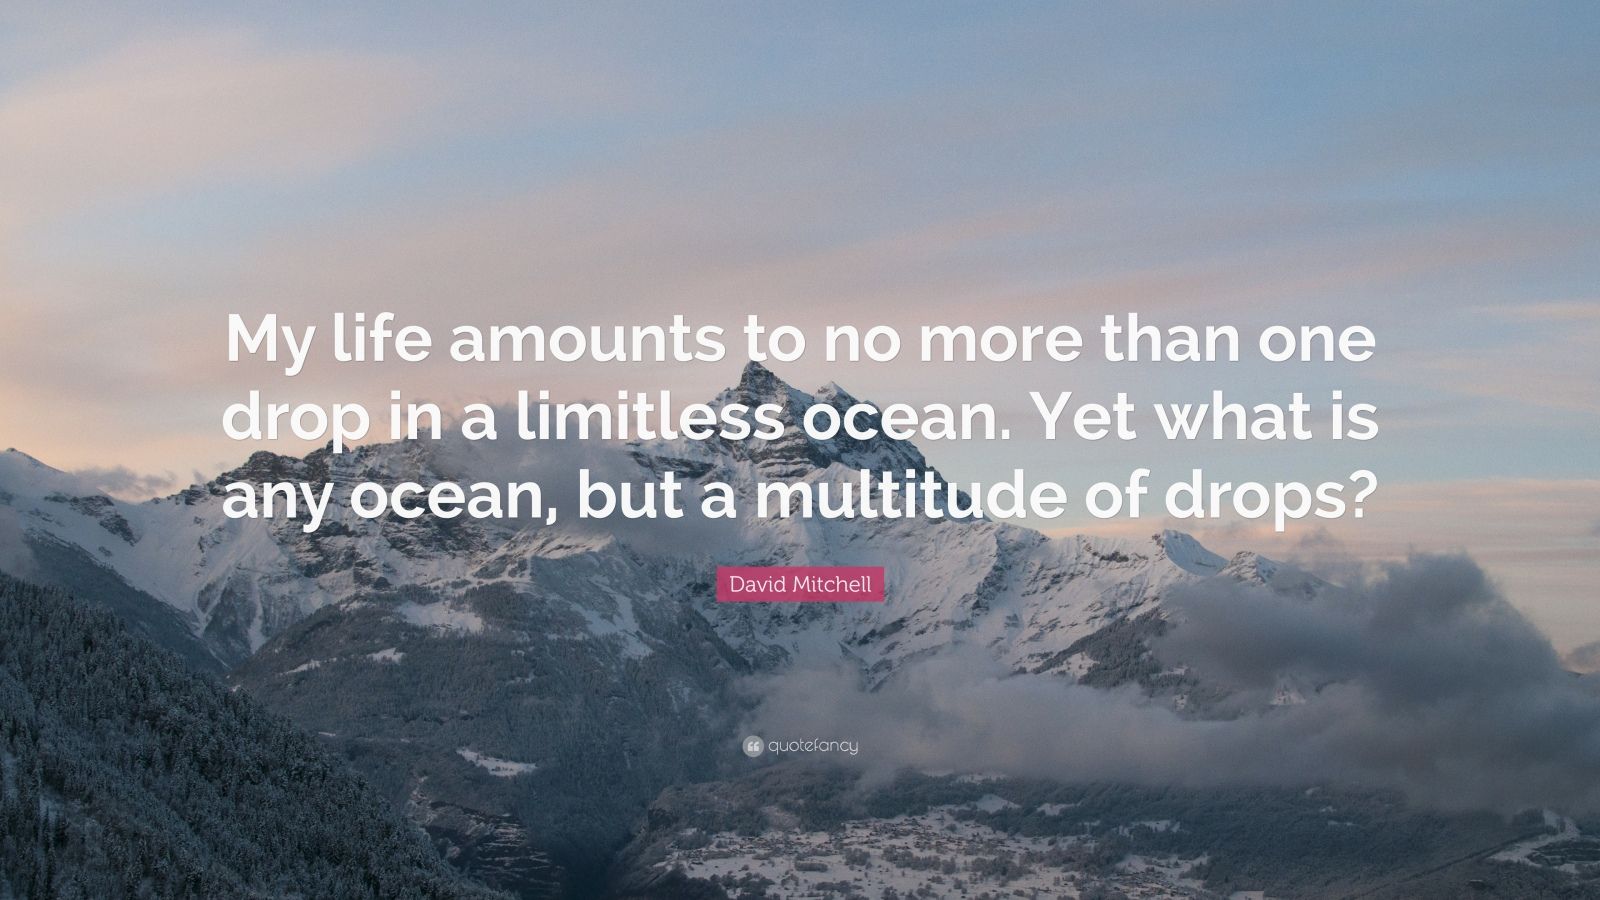 David Mitchell Quote: "My life amounts to no more than one drop in a limitless ocean. Yet what ...